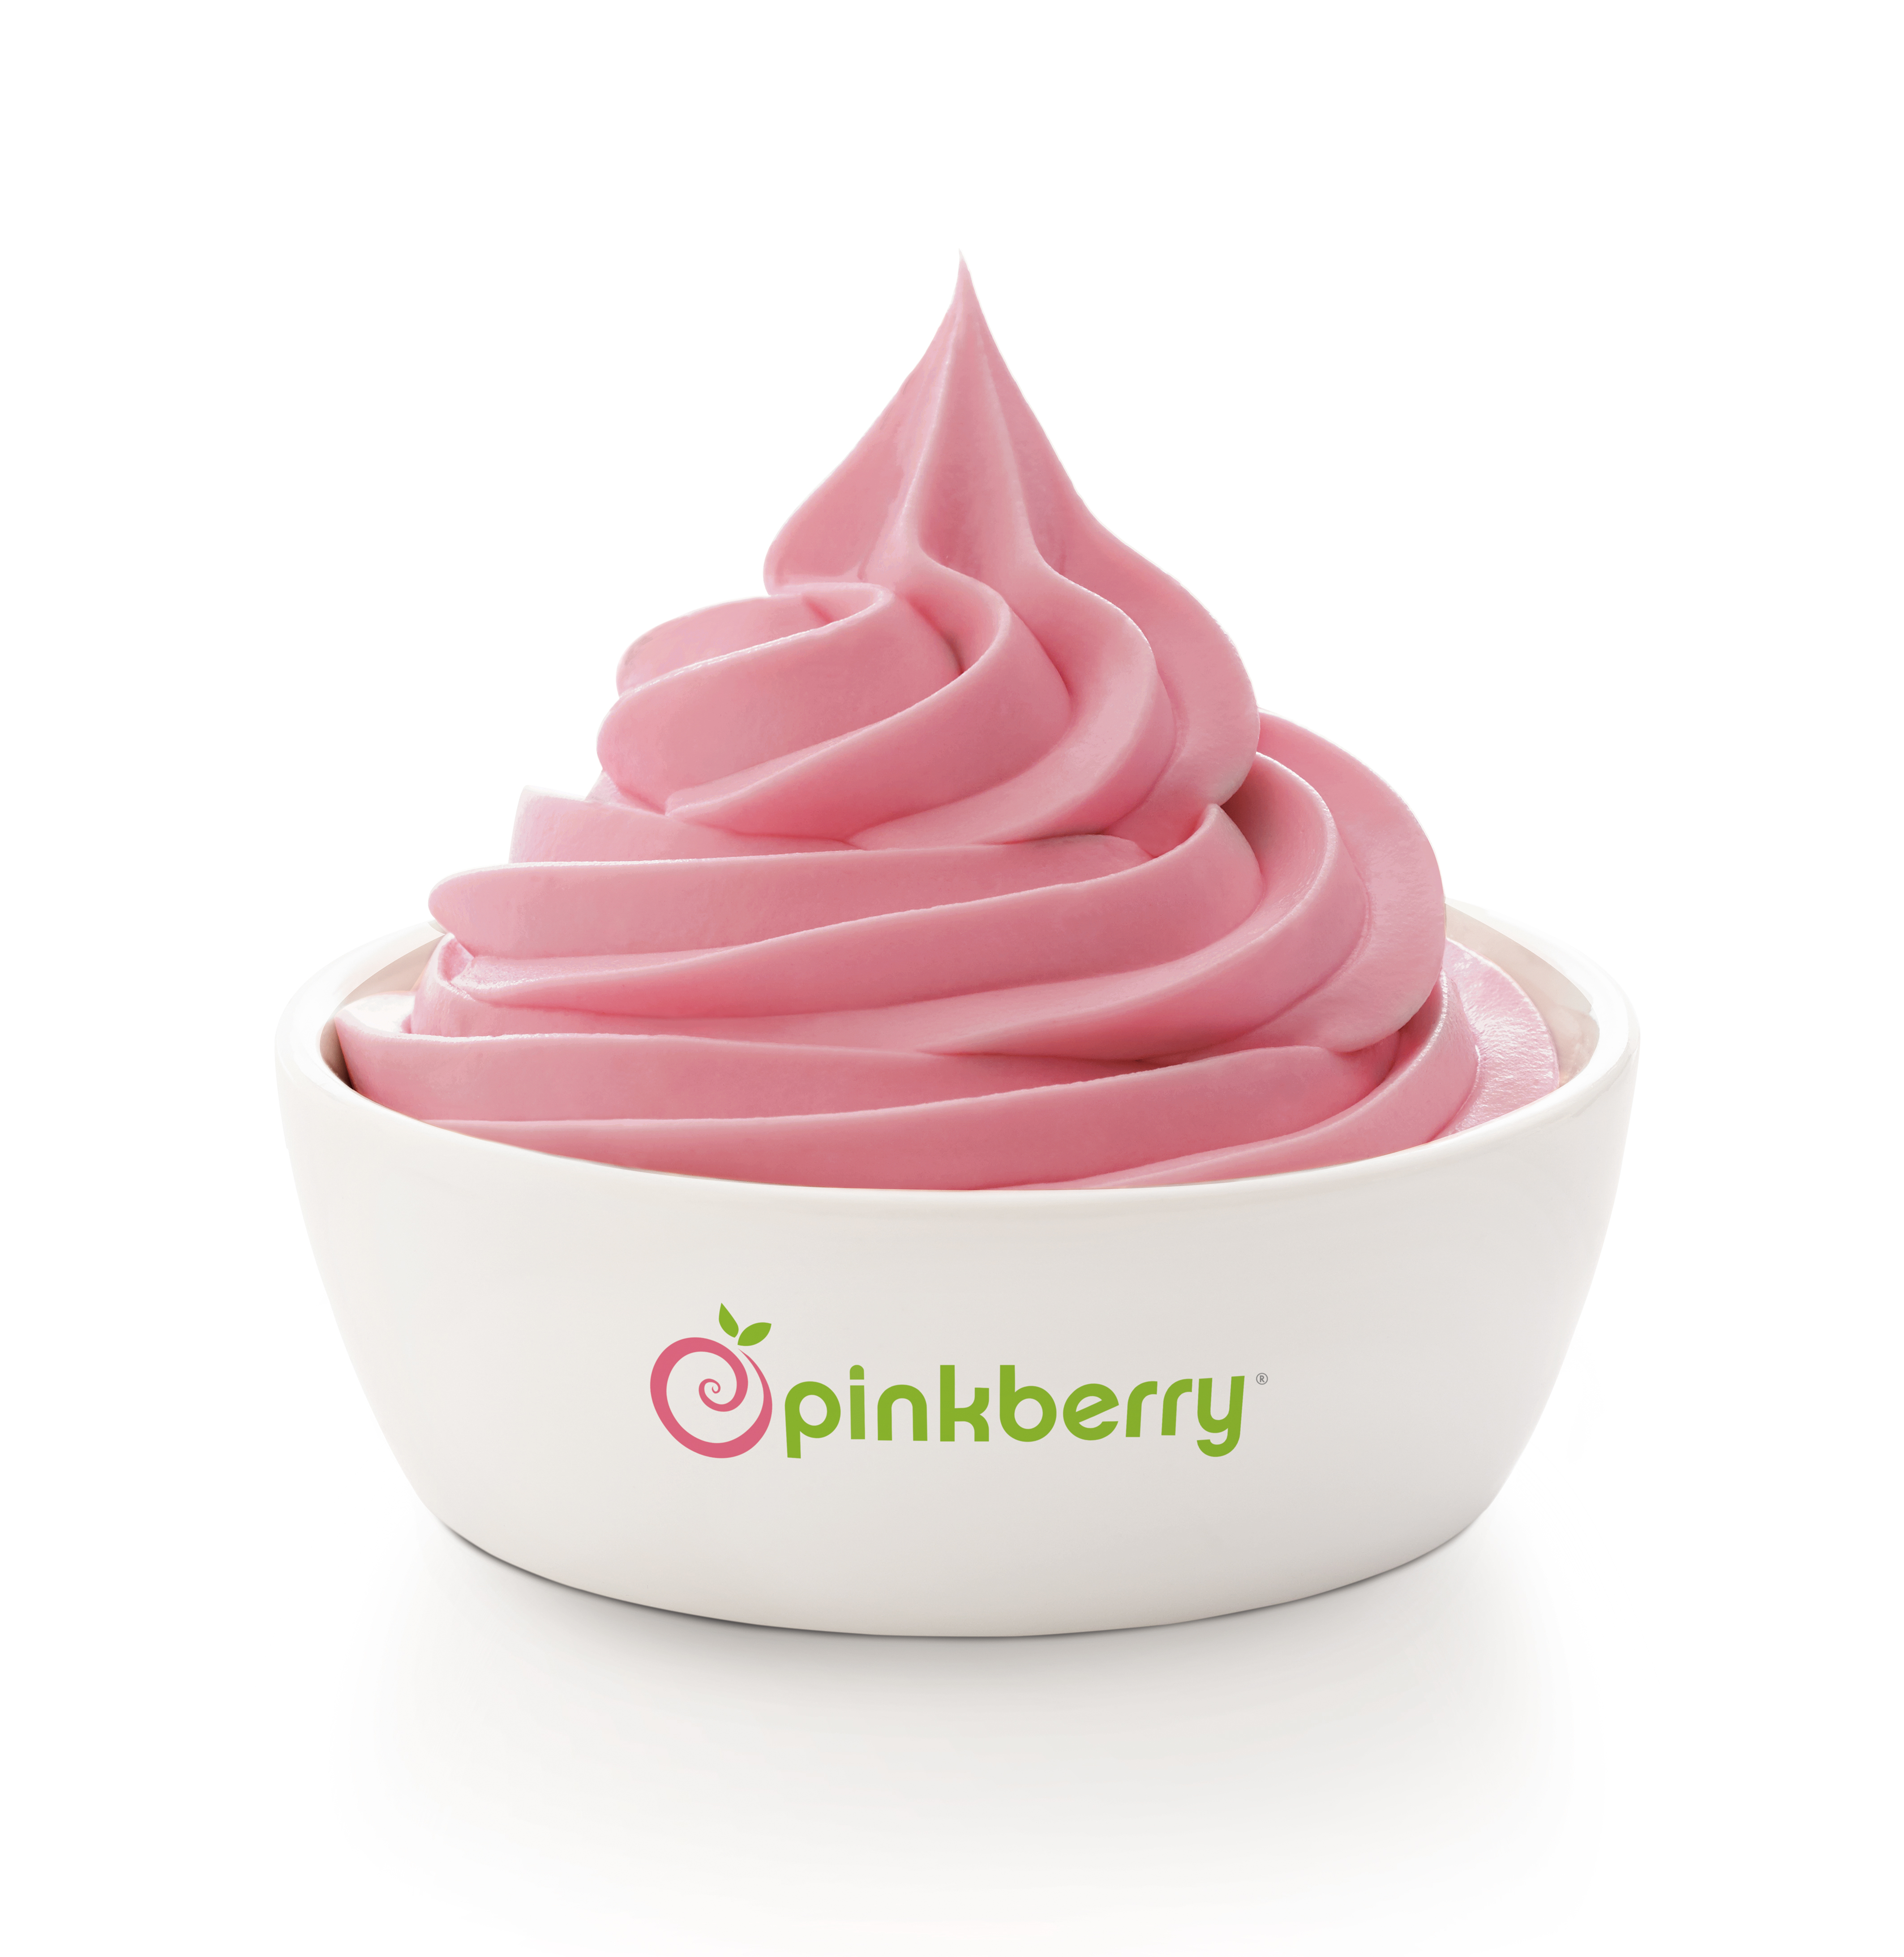 Elevate Your Senses with Pinkberry's Seductive Pictures.